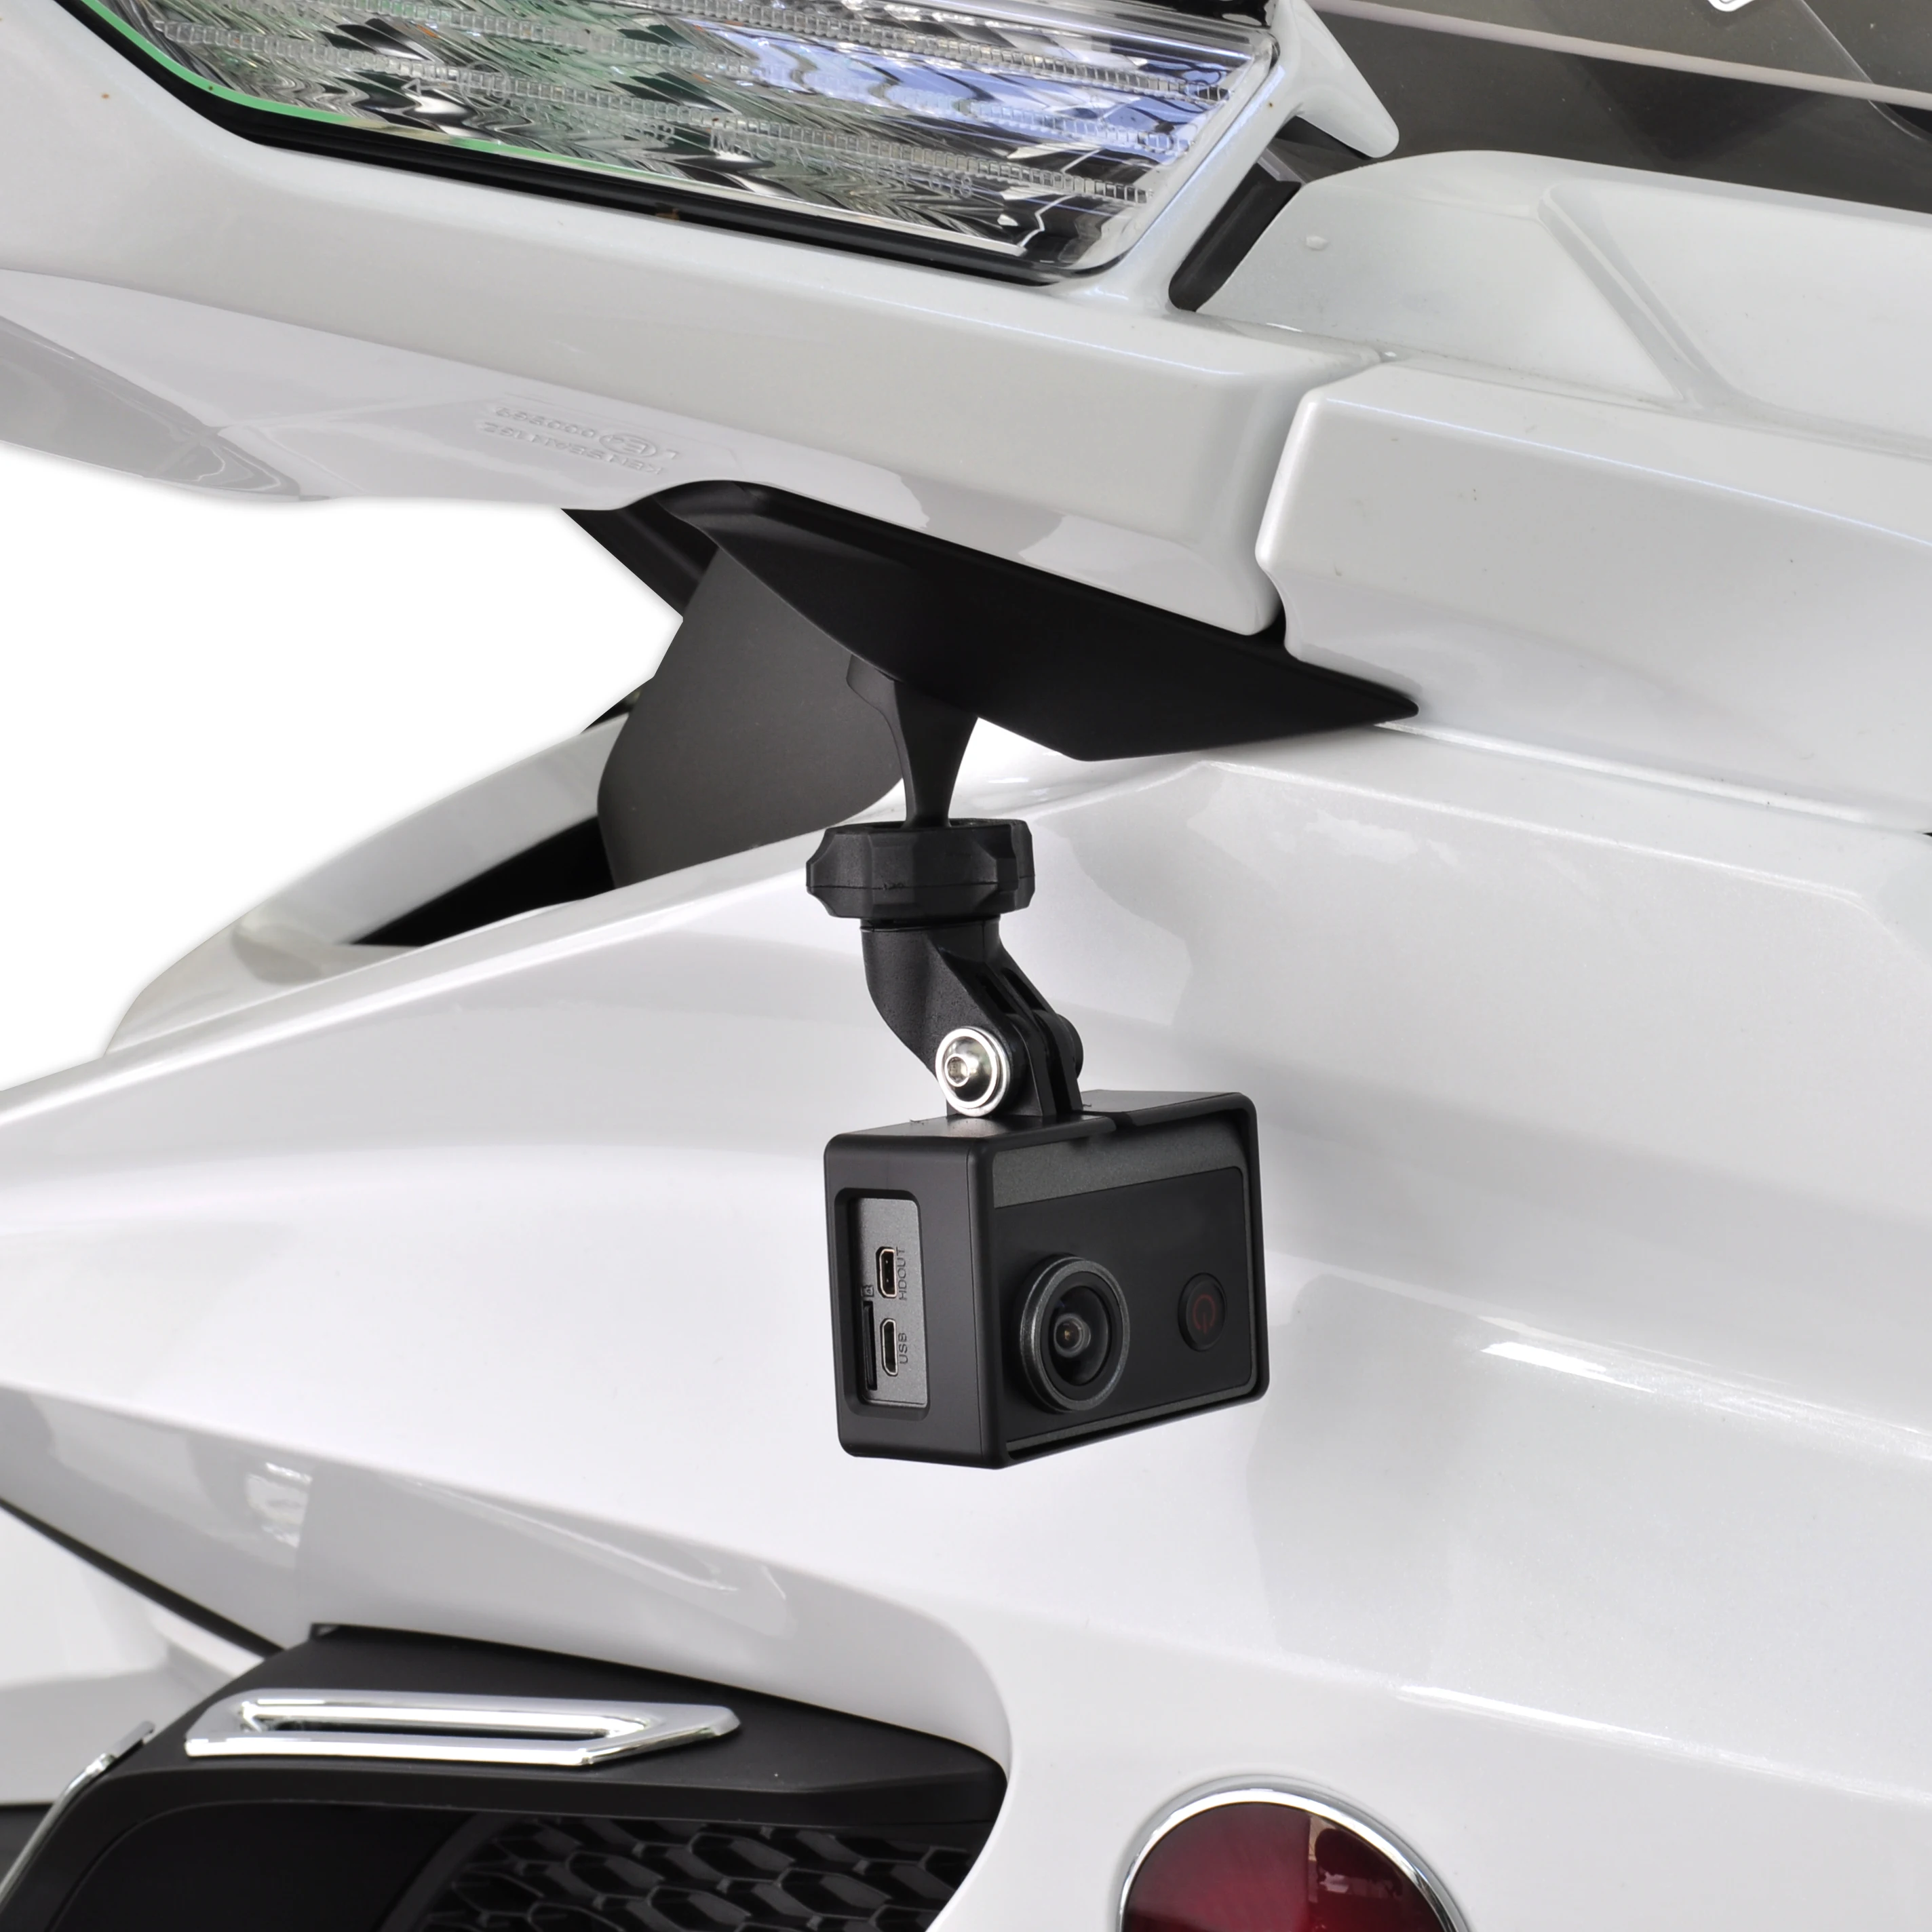 Aluminum Alloy Rear View Mirror Camera Frame Bracket Accessory Mounting Kit For Honda Gold Wing GL1800 F6B 2018-2023 Motorcycle motorcycle engine protector cover crash guard for honda gold wing gl1800 gl1800b f6b motorcycle 2018 up